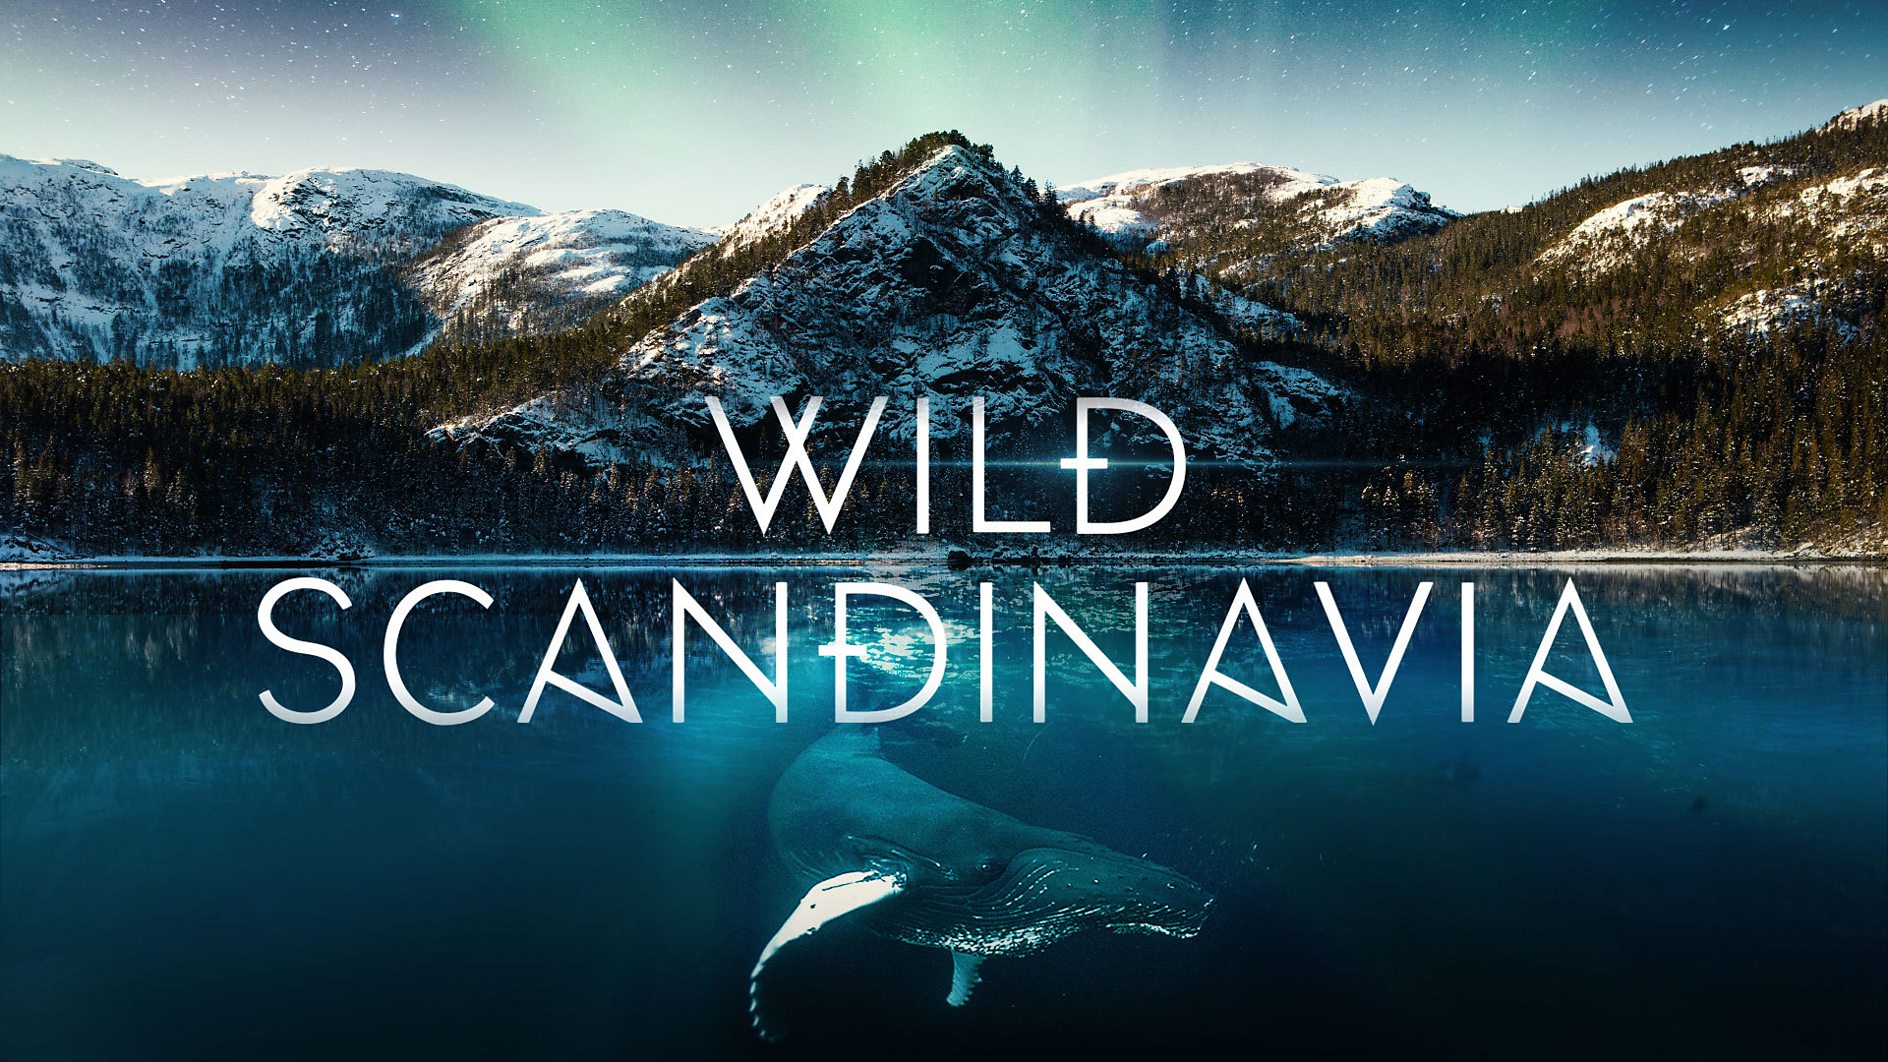 Wild Scandinavia: discover the furthest northern reaches of Europe with narrator Rebecca Ferguson